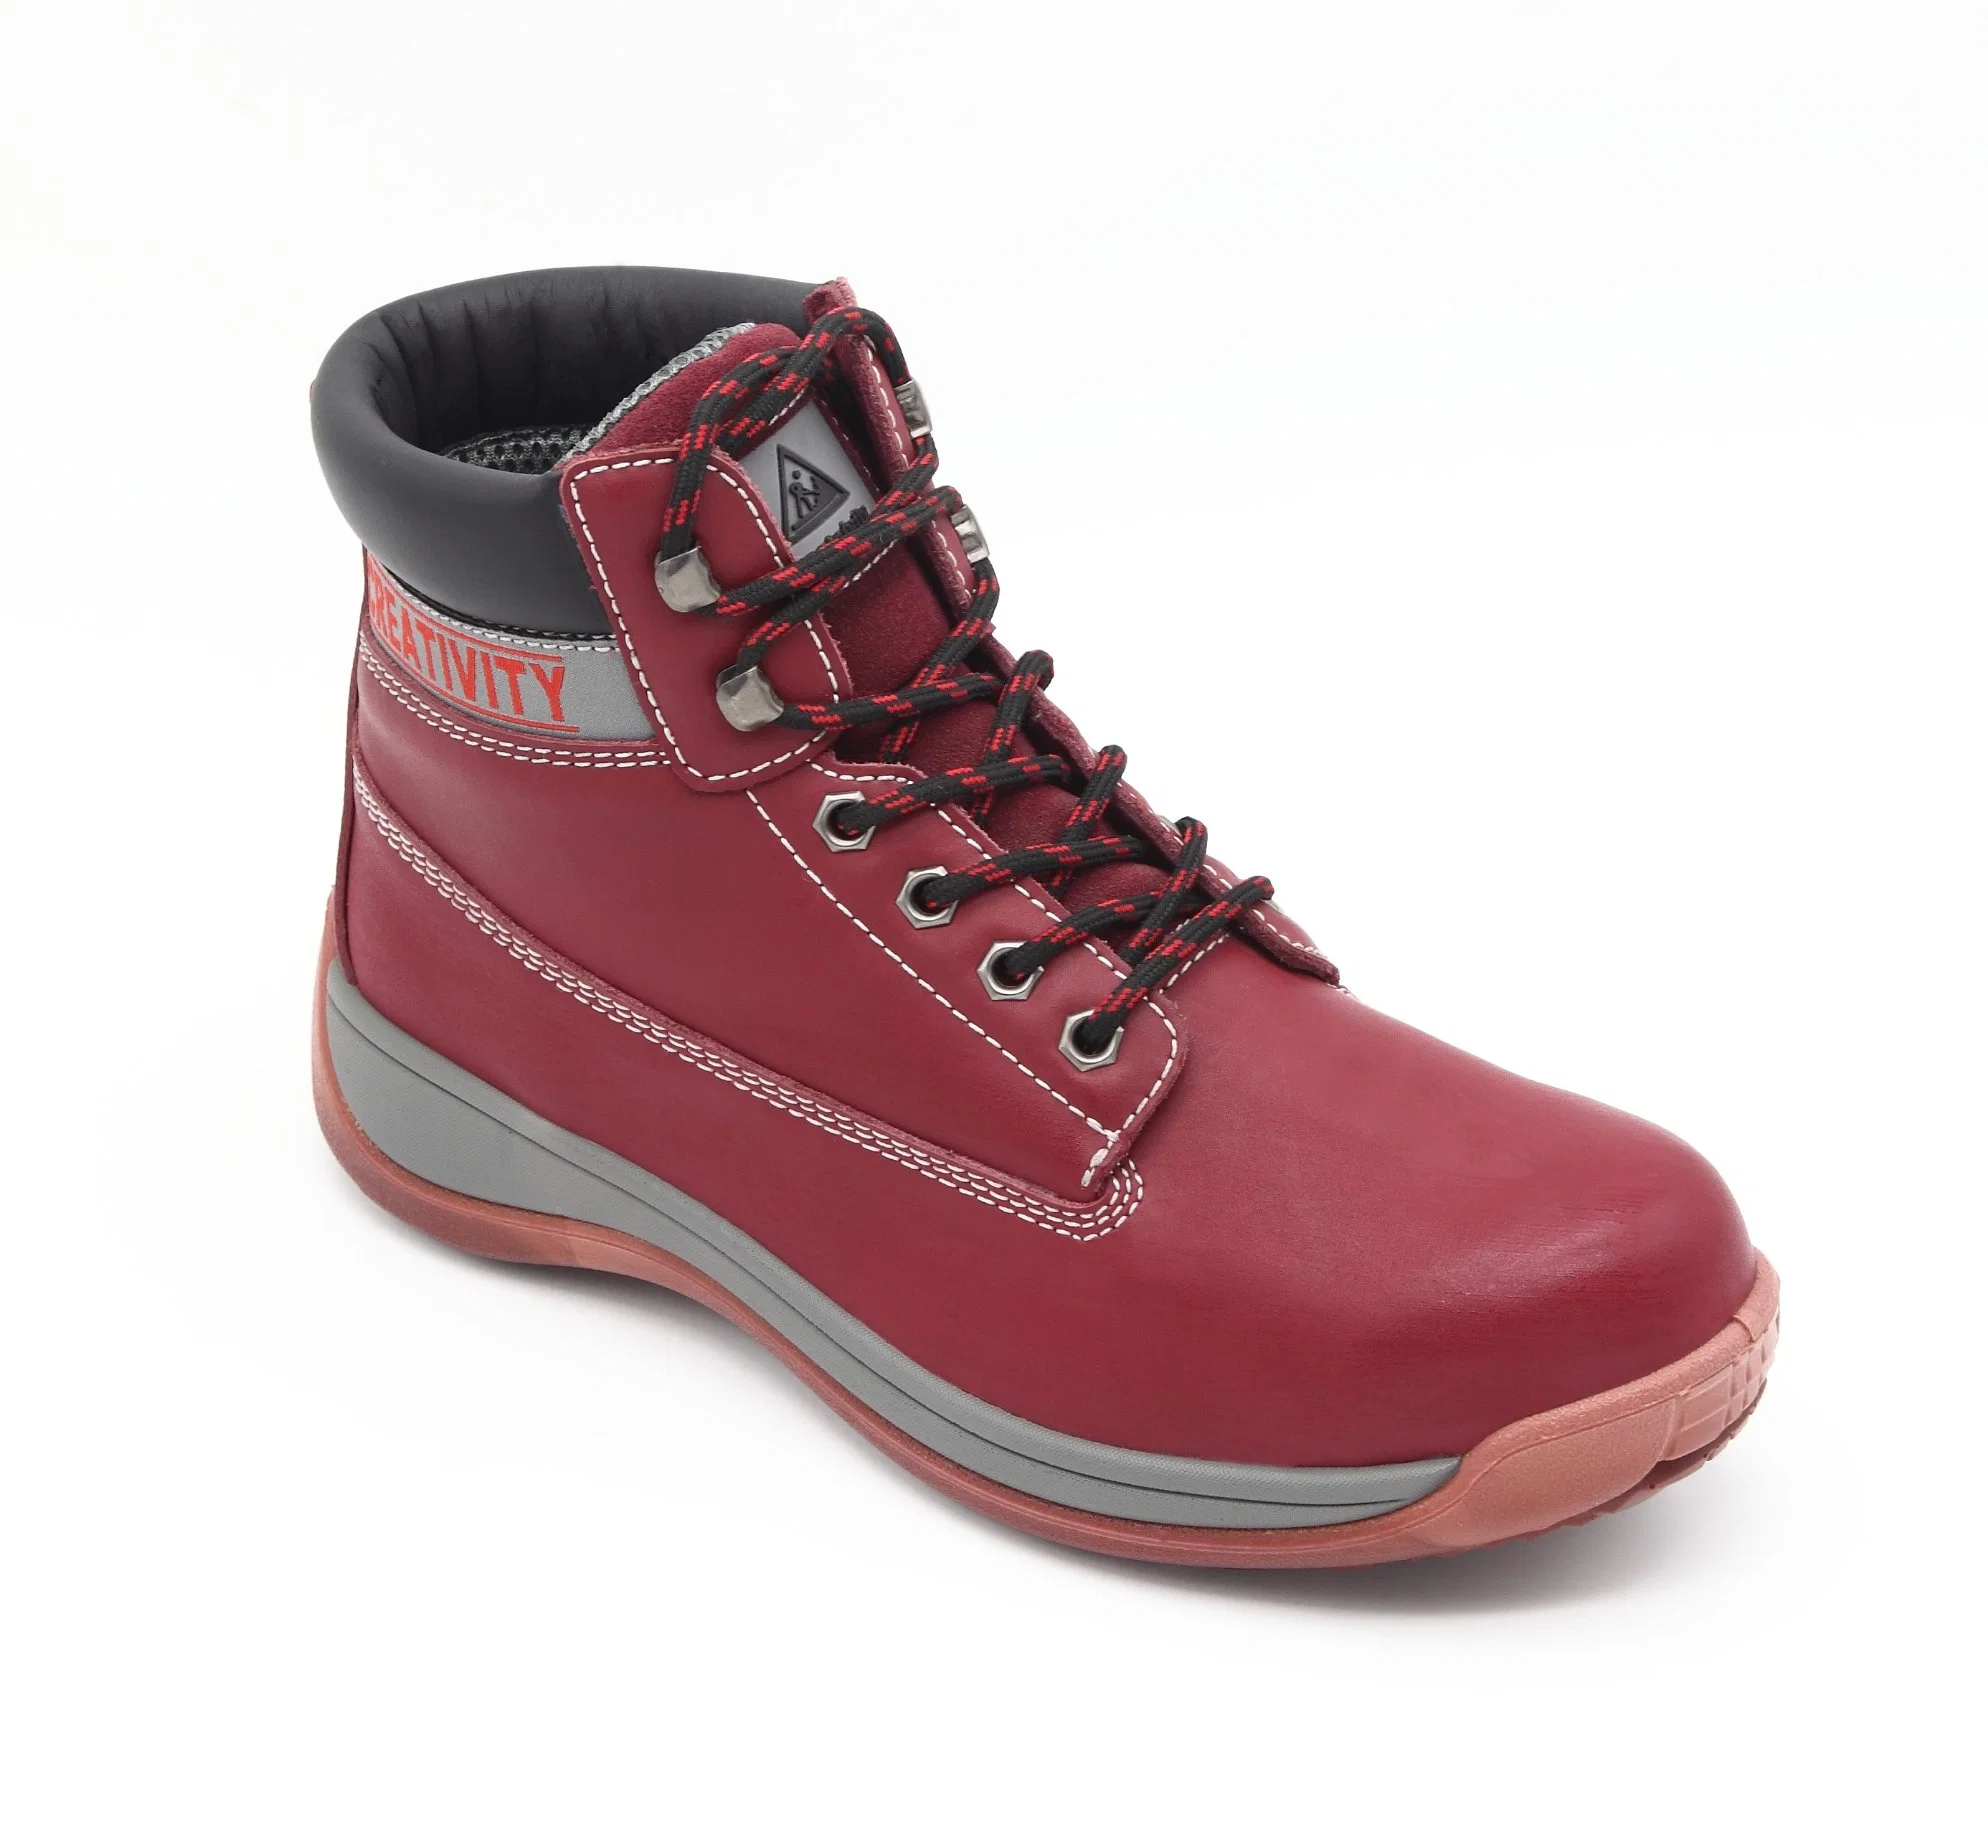 Men's Red Boots Industrial Leather Safety Shoes